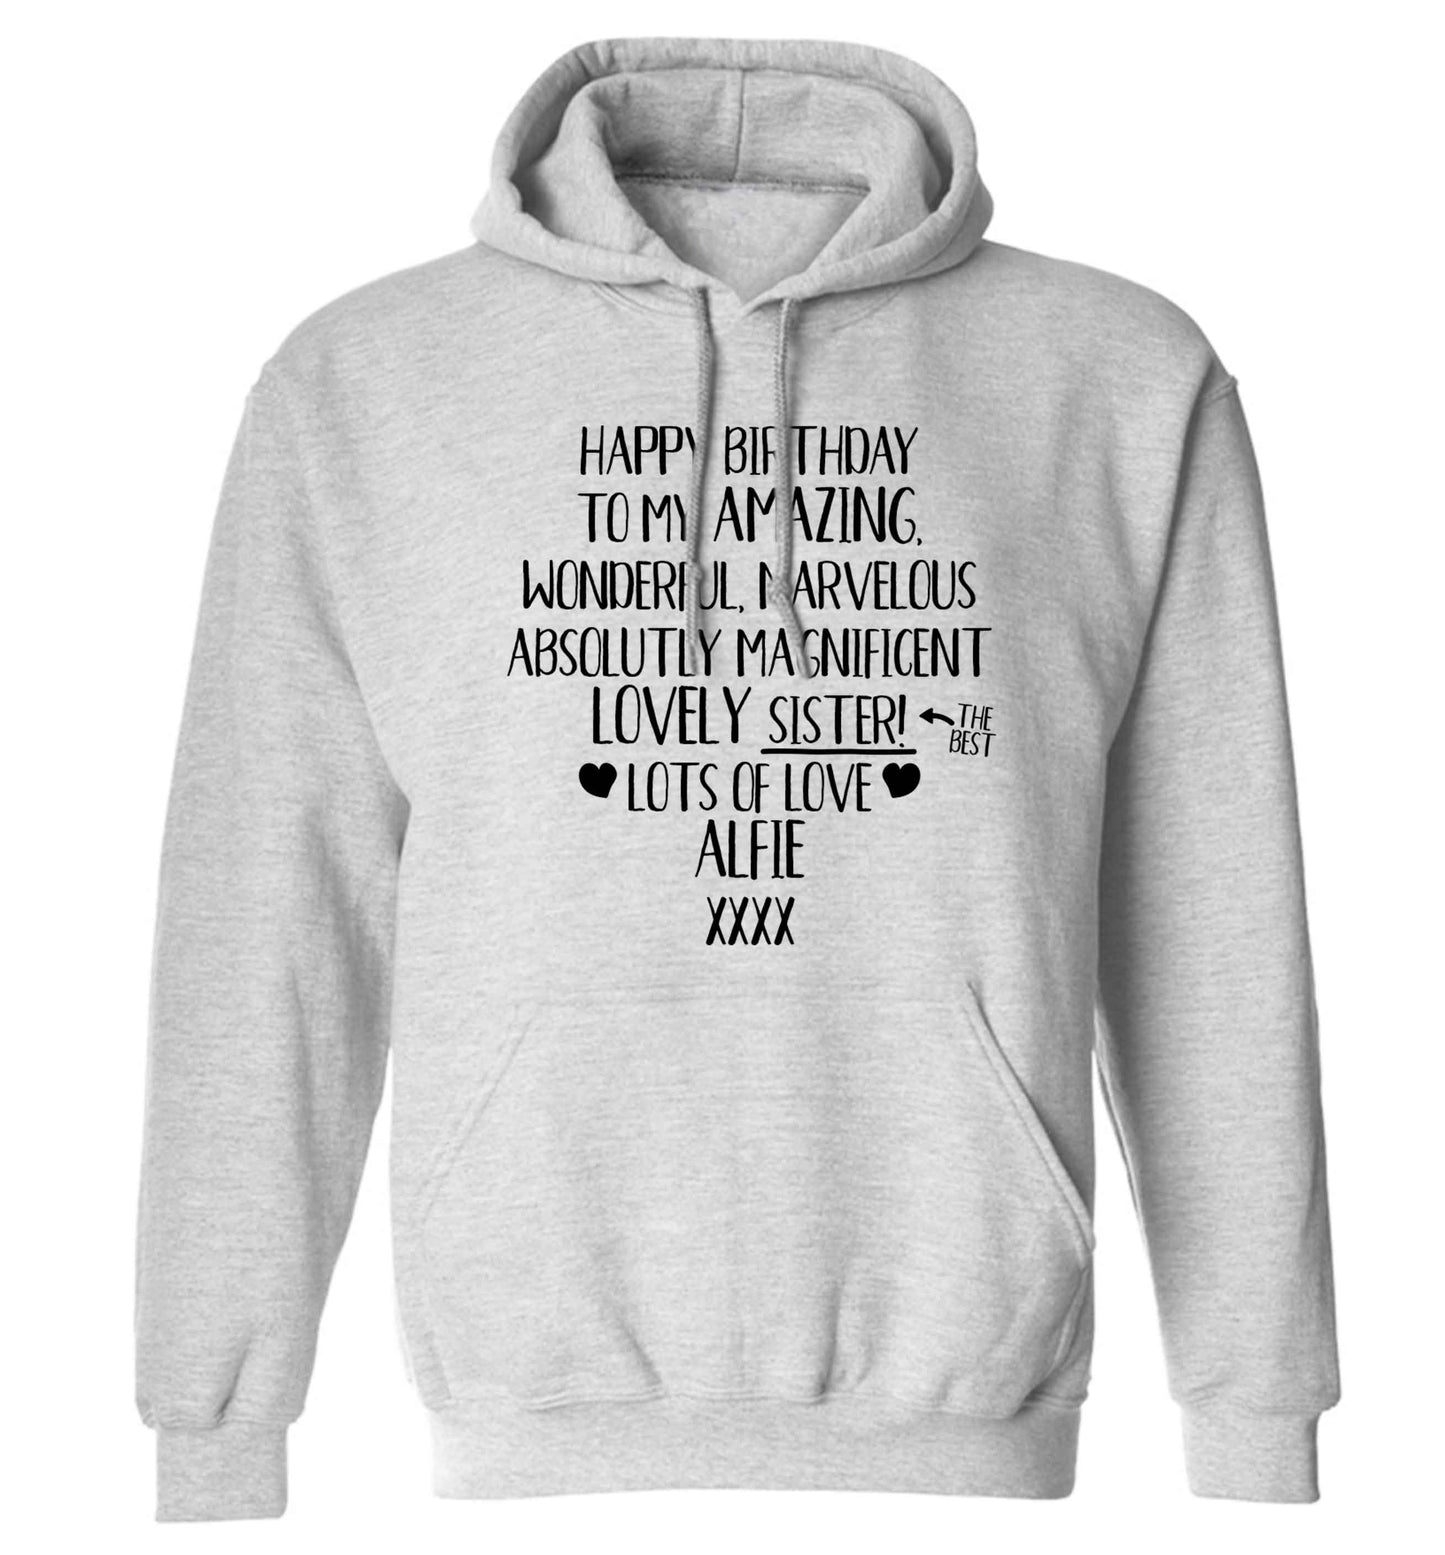 Personalised happy birthday to my amazing, wonderful, lovely sister adults unisex grey hoodie 2XL